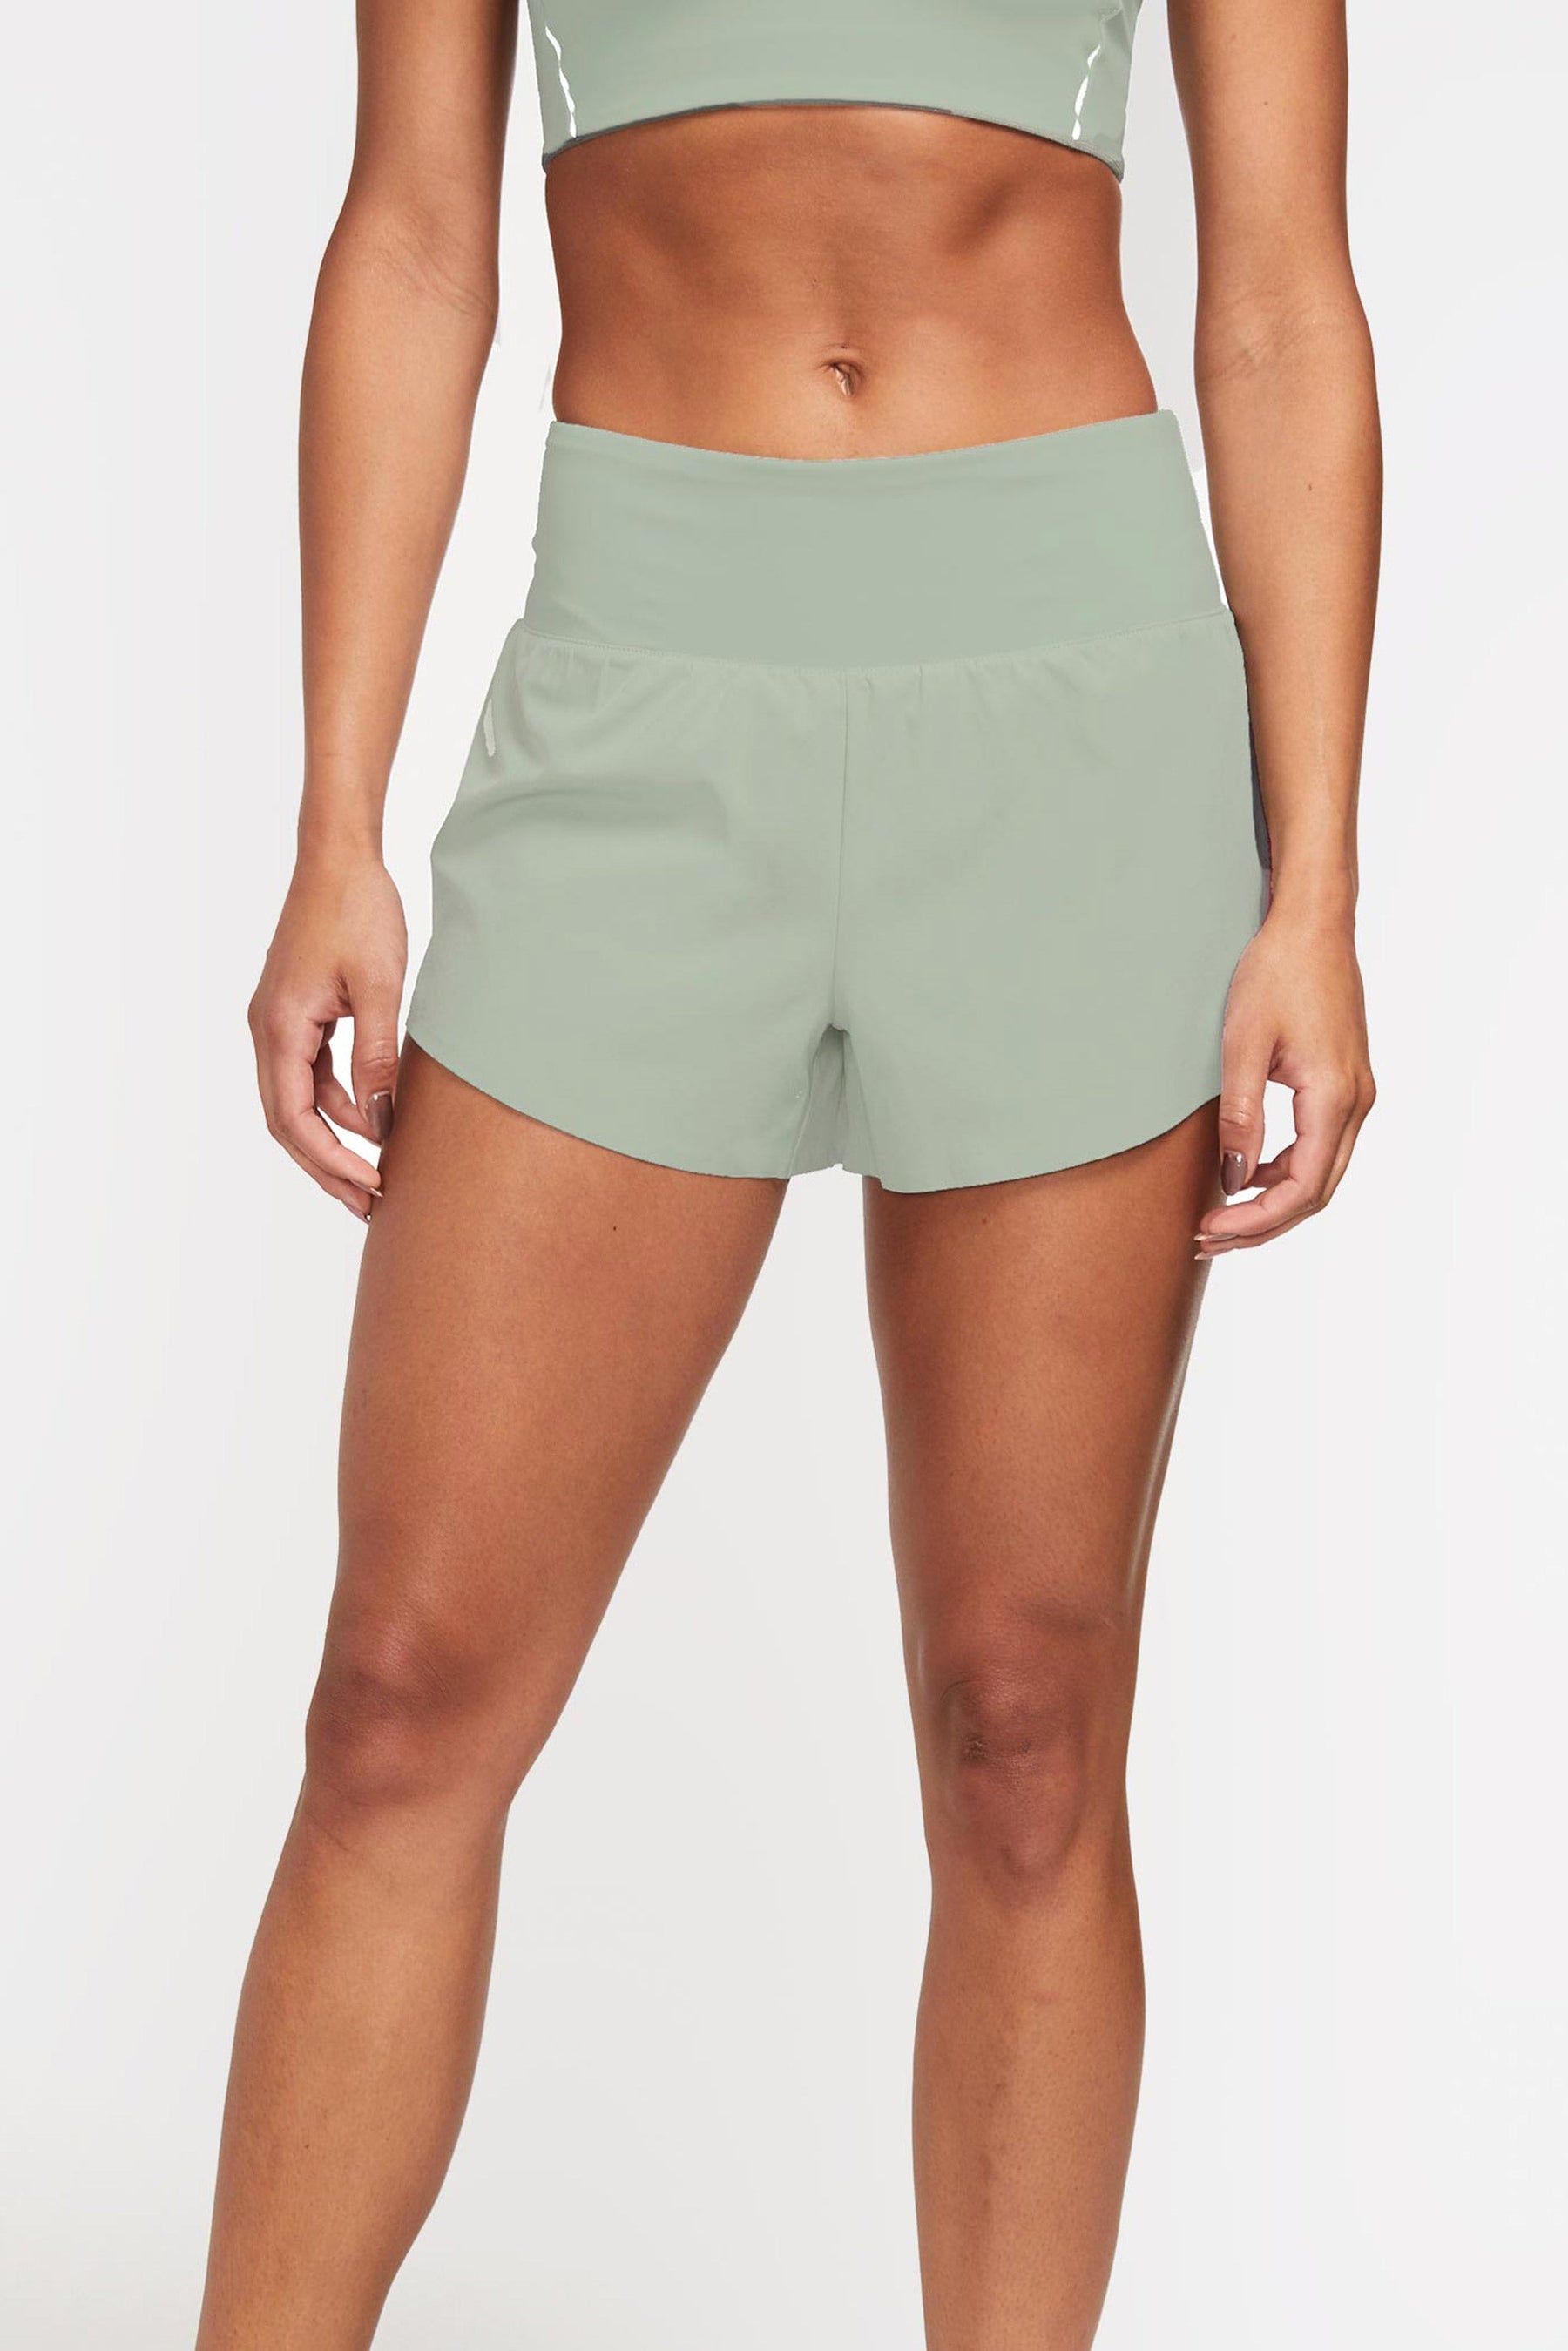 Athletic workout running shorts in glacier color front view 